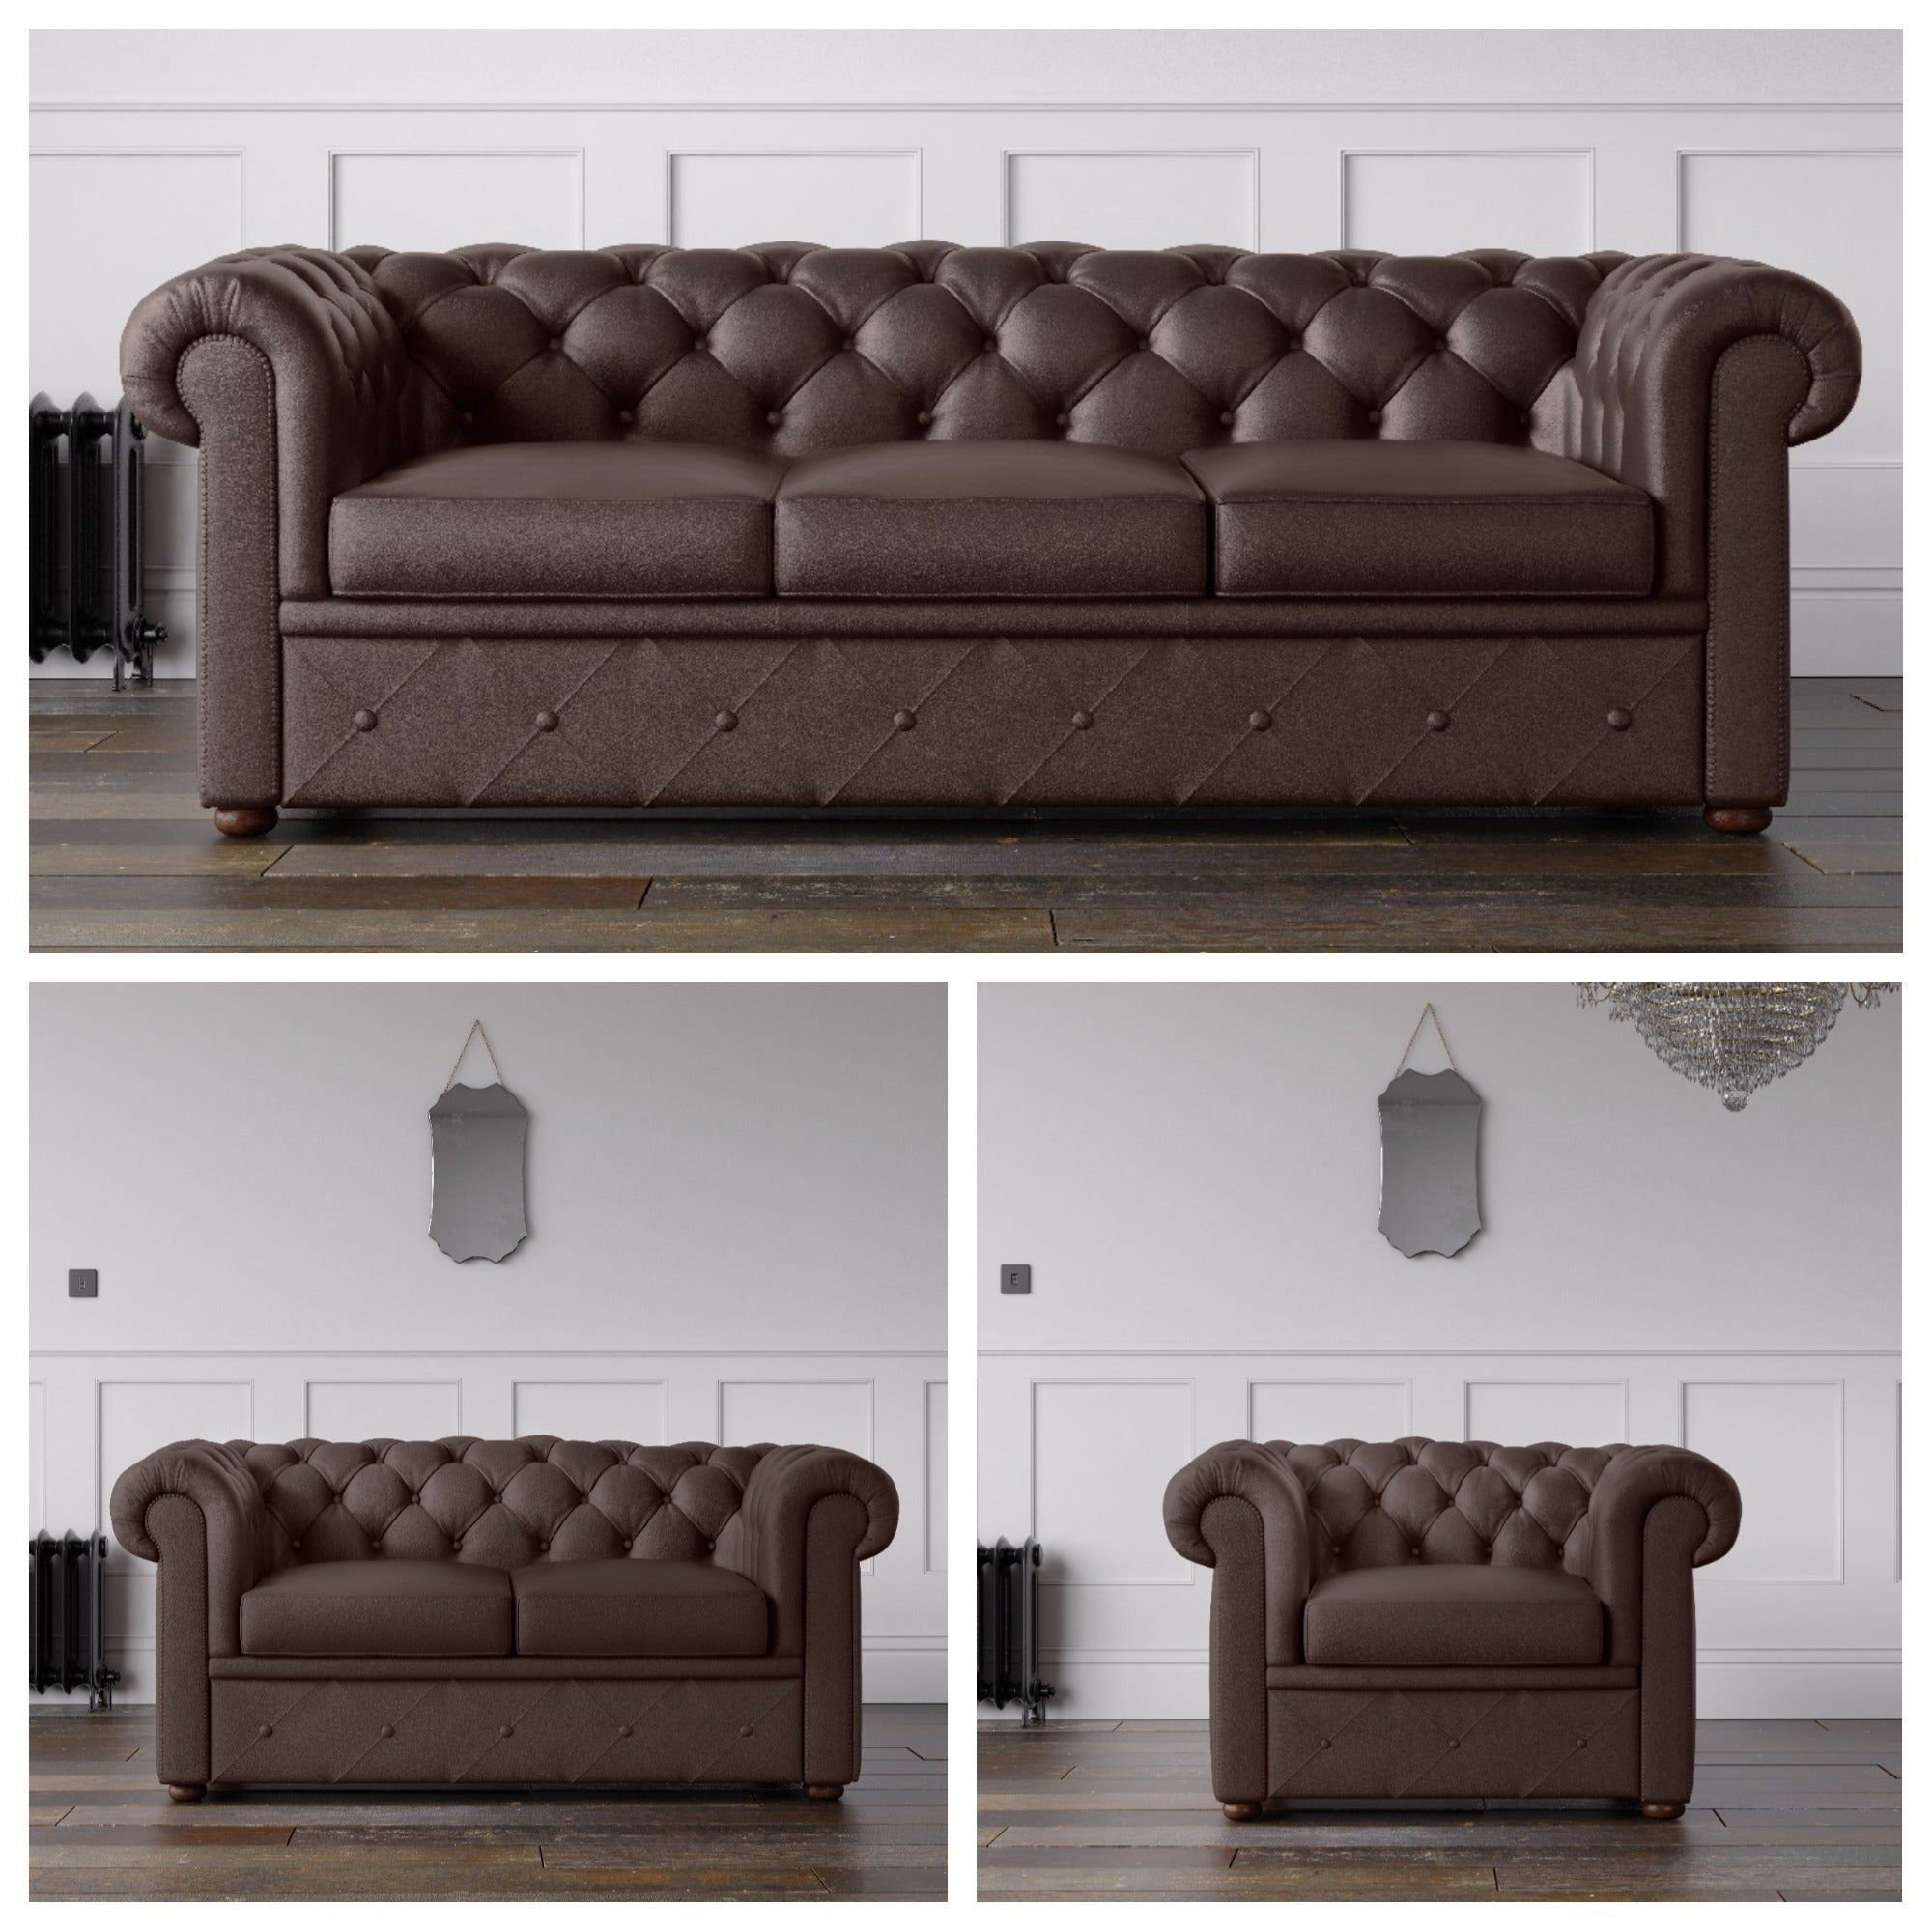 Chesterfield Faux Leather Sofa Chocolate – Endure Fabrics With Faux Leather Sofas In Chocolate Brown (Gallery 1 of 20)